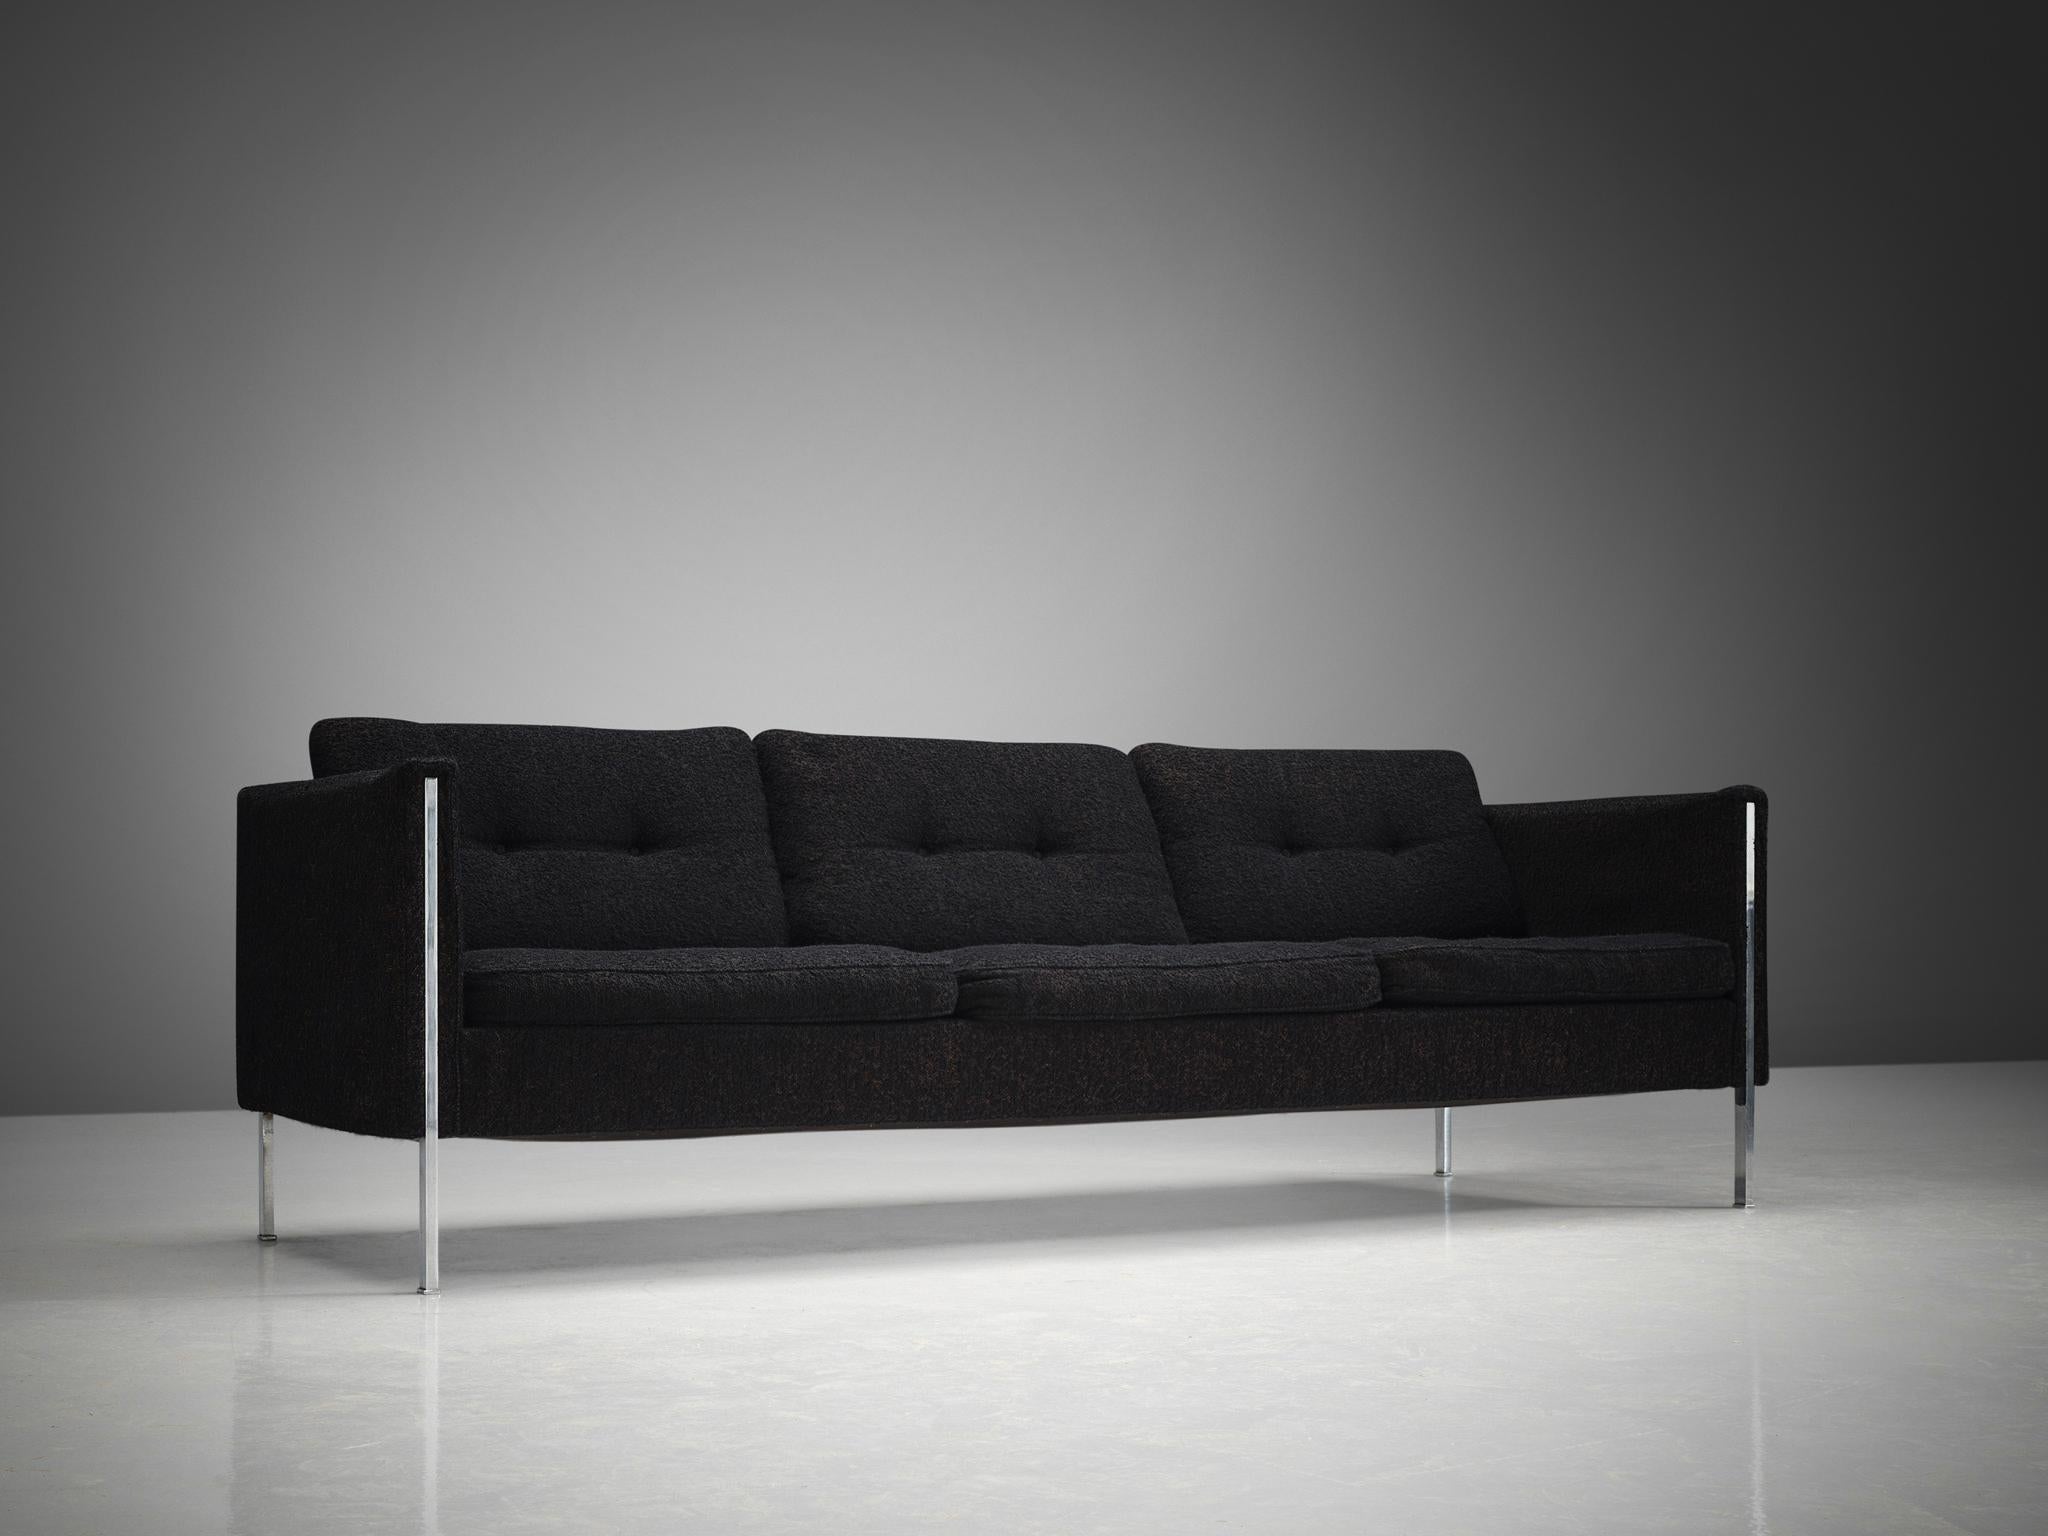 Pierre Paulin for Artifort, sofa model '442/3', fabric, steel, The Netherlands, 1962.

A sofa design by Pierre Paulin made into realization in 1962. The sleek fusion of steel and black upholstery imparts a modern and sophisticated aesthetic to this